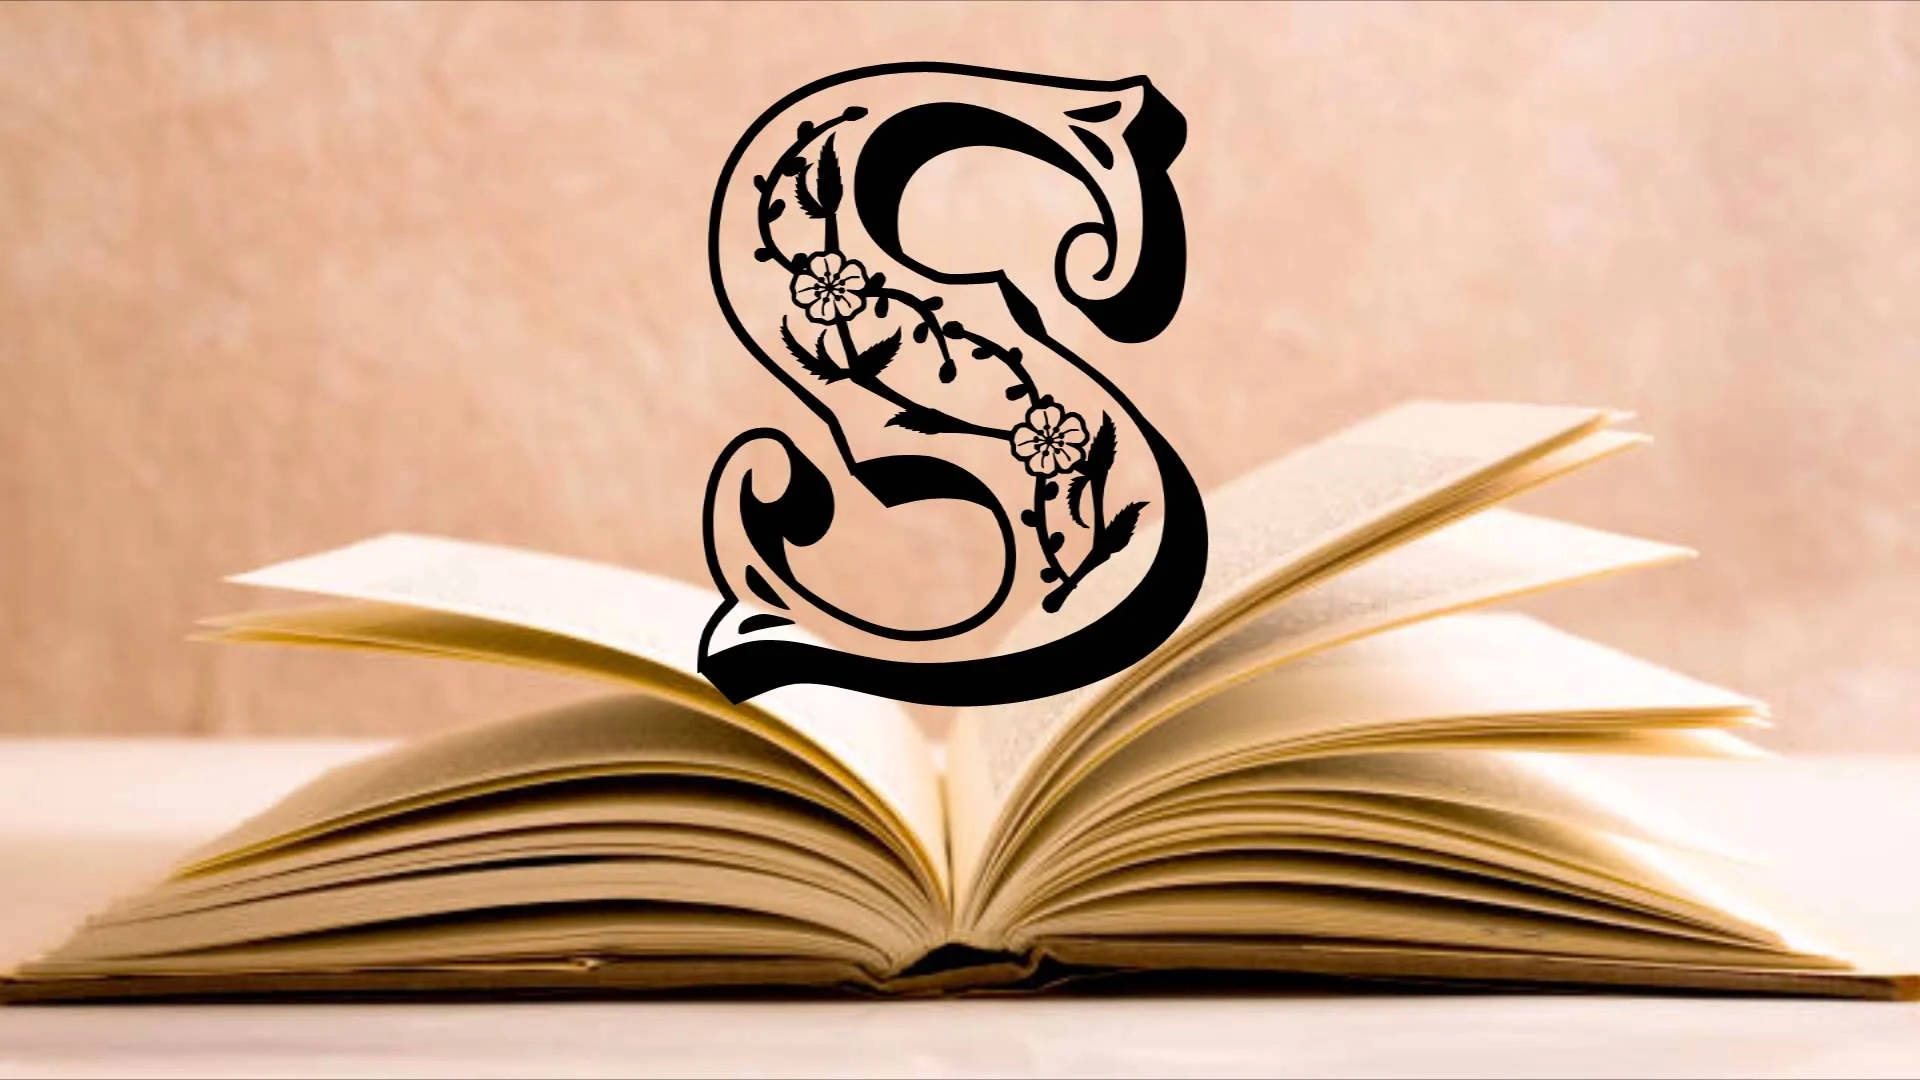 Letter S Over A Book Background